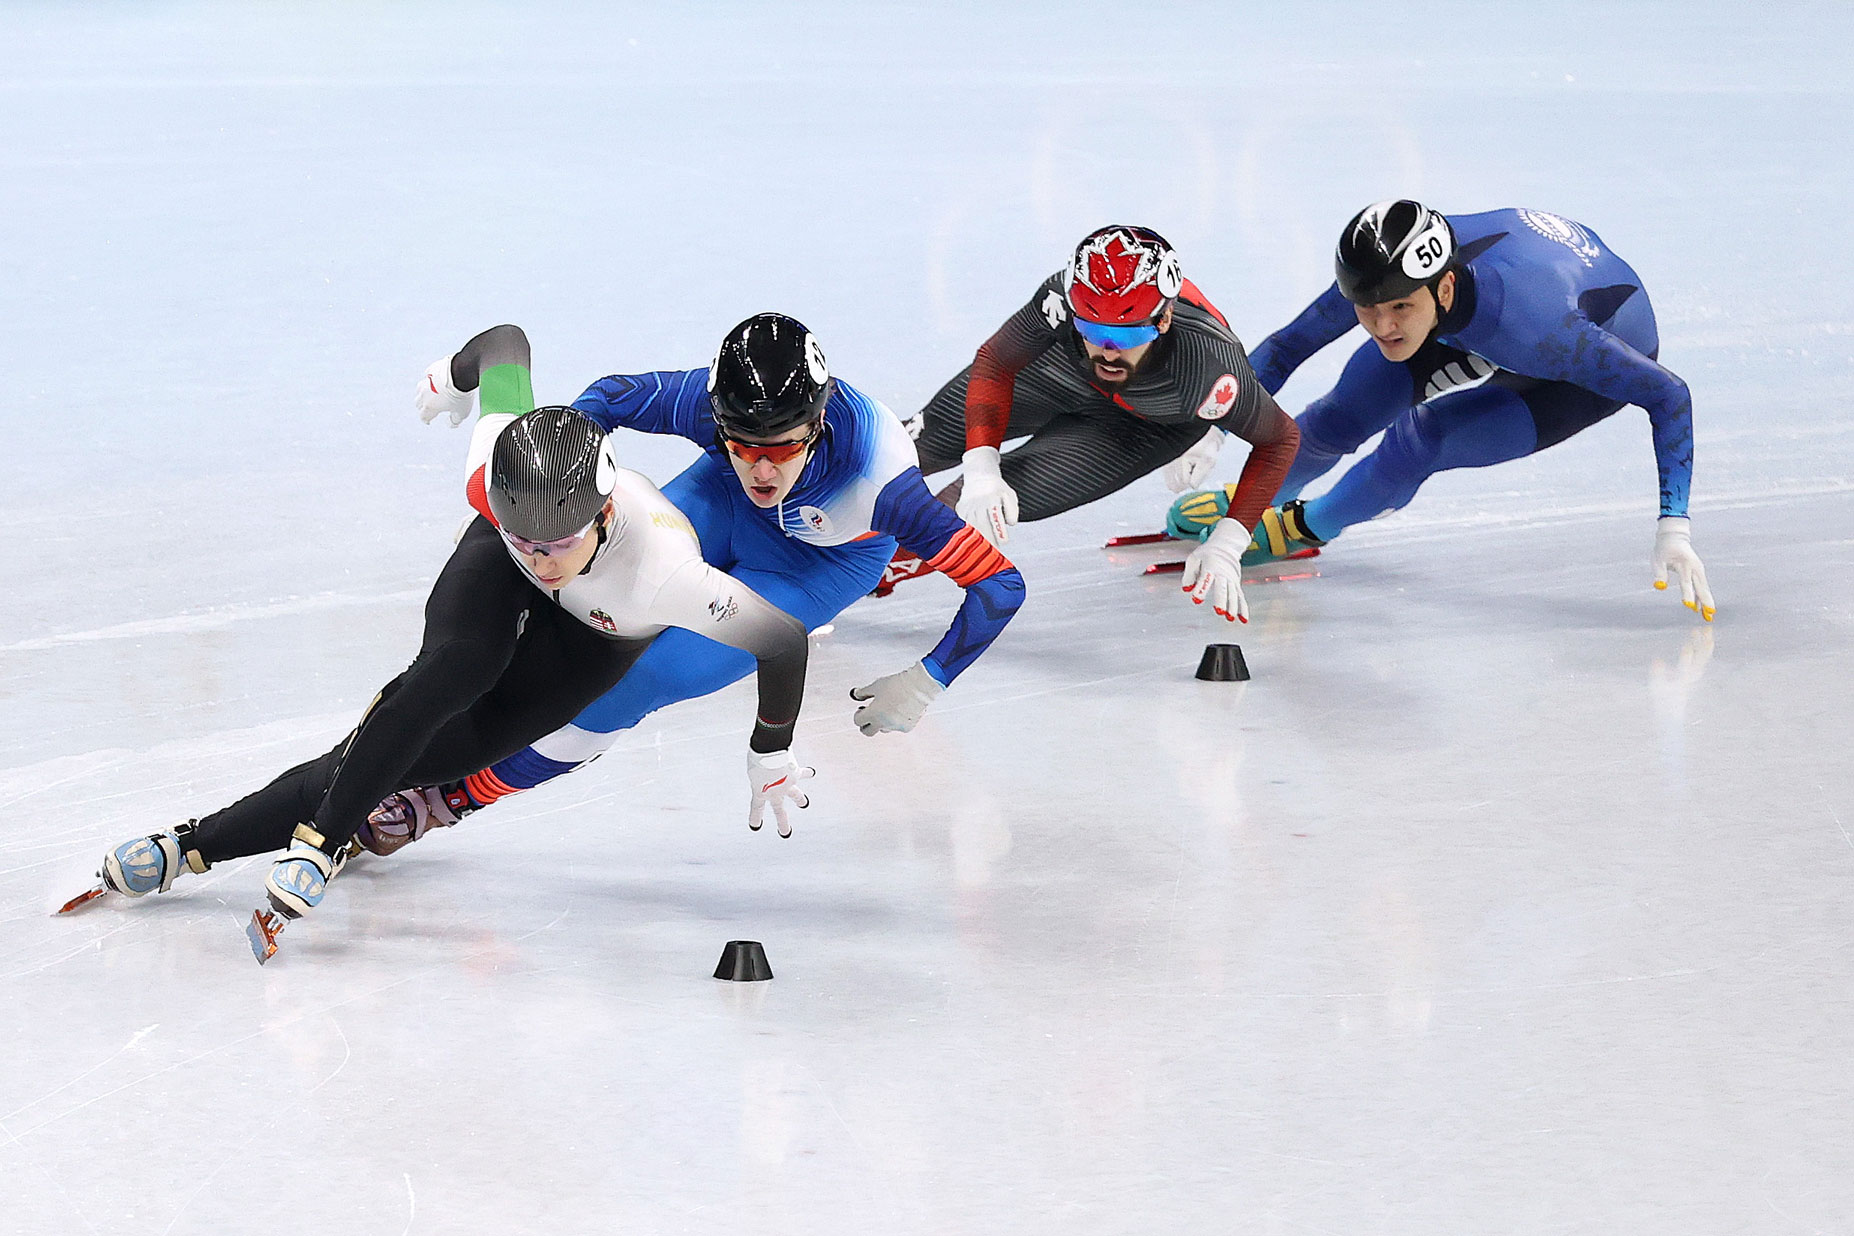 Athletes from Hungary, the ROC, Canada and Kazakhstan skate during the men's 500m short track speed skating event on February 13.